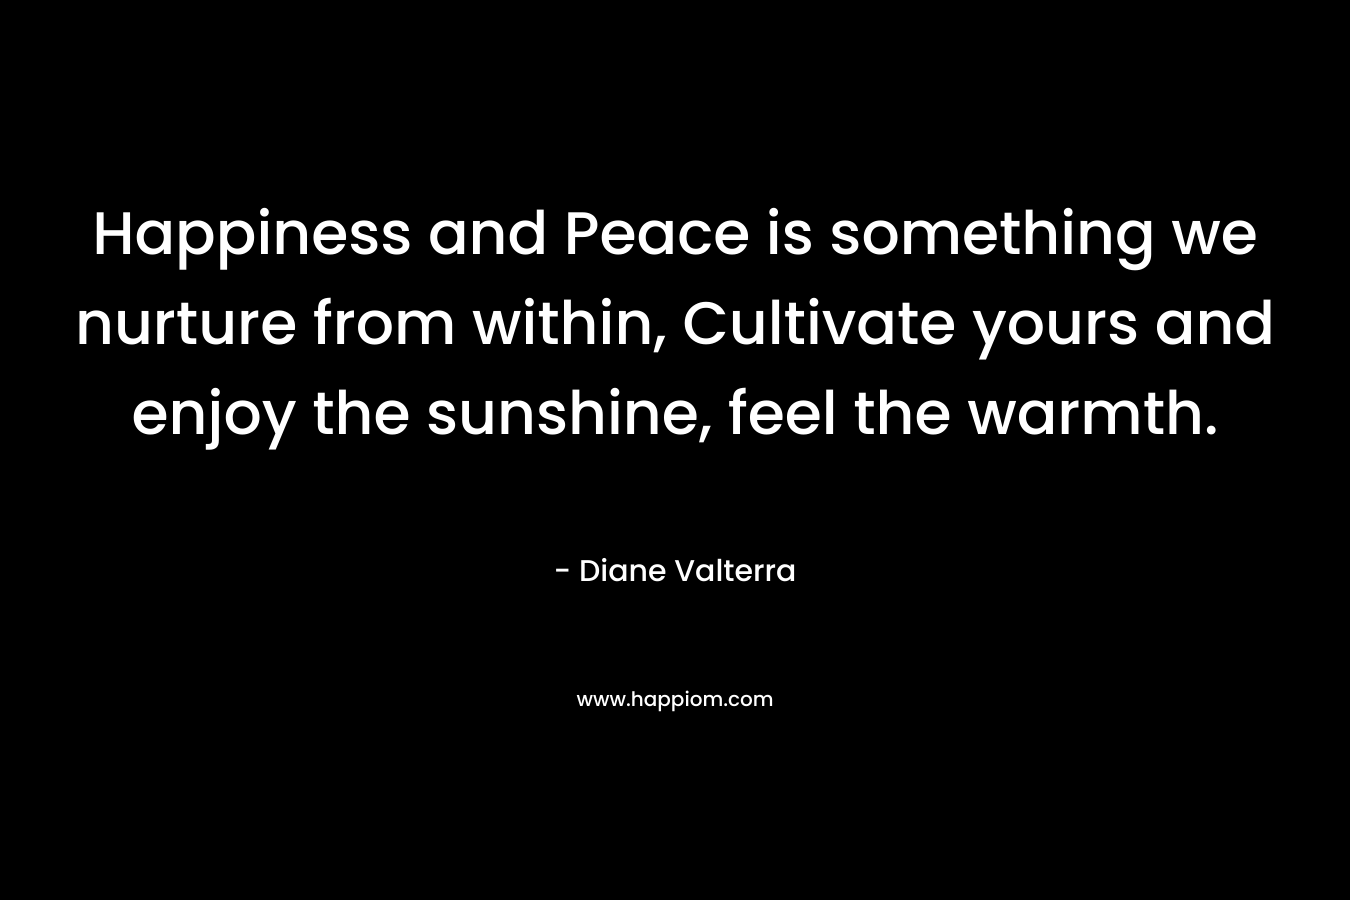 Happiness and Peace is something we nurture from within, Cultivate yours and enjoy the sunshine, feel the warmth. – Diane Valterra